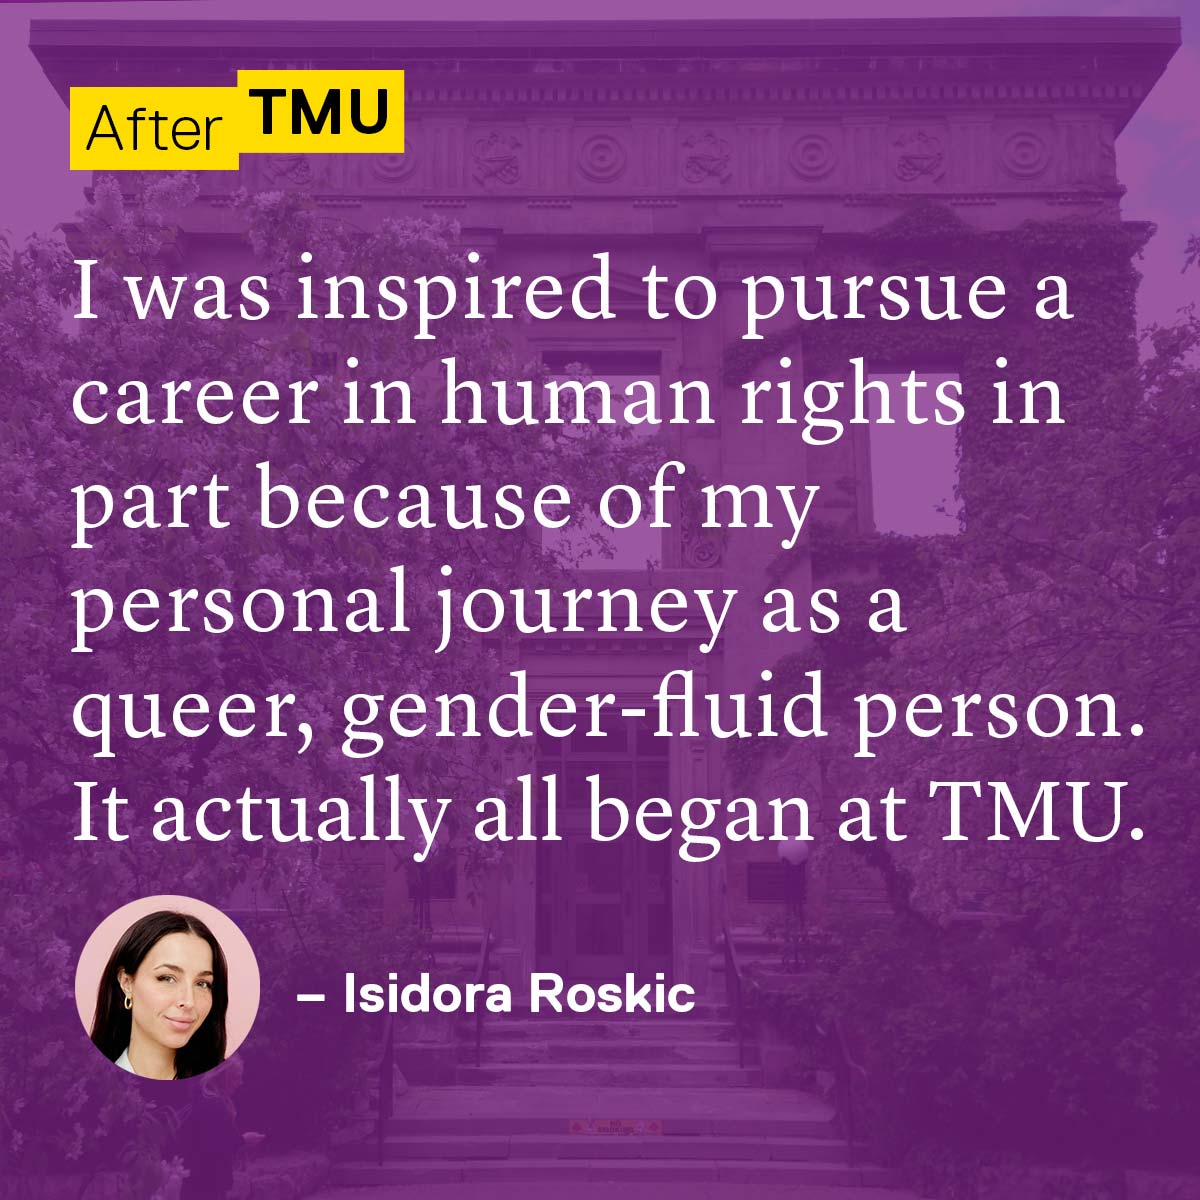 I was inspired to pursue a career in human rights in part because of my personal journey as a queer, gender-fluid person. It actually all began at TMU. Isidora Roskic